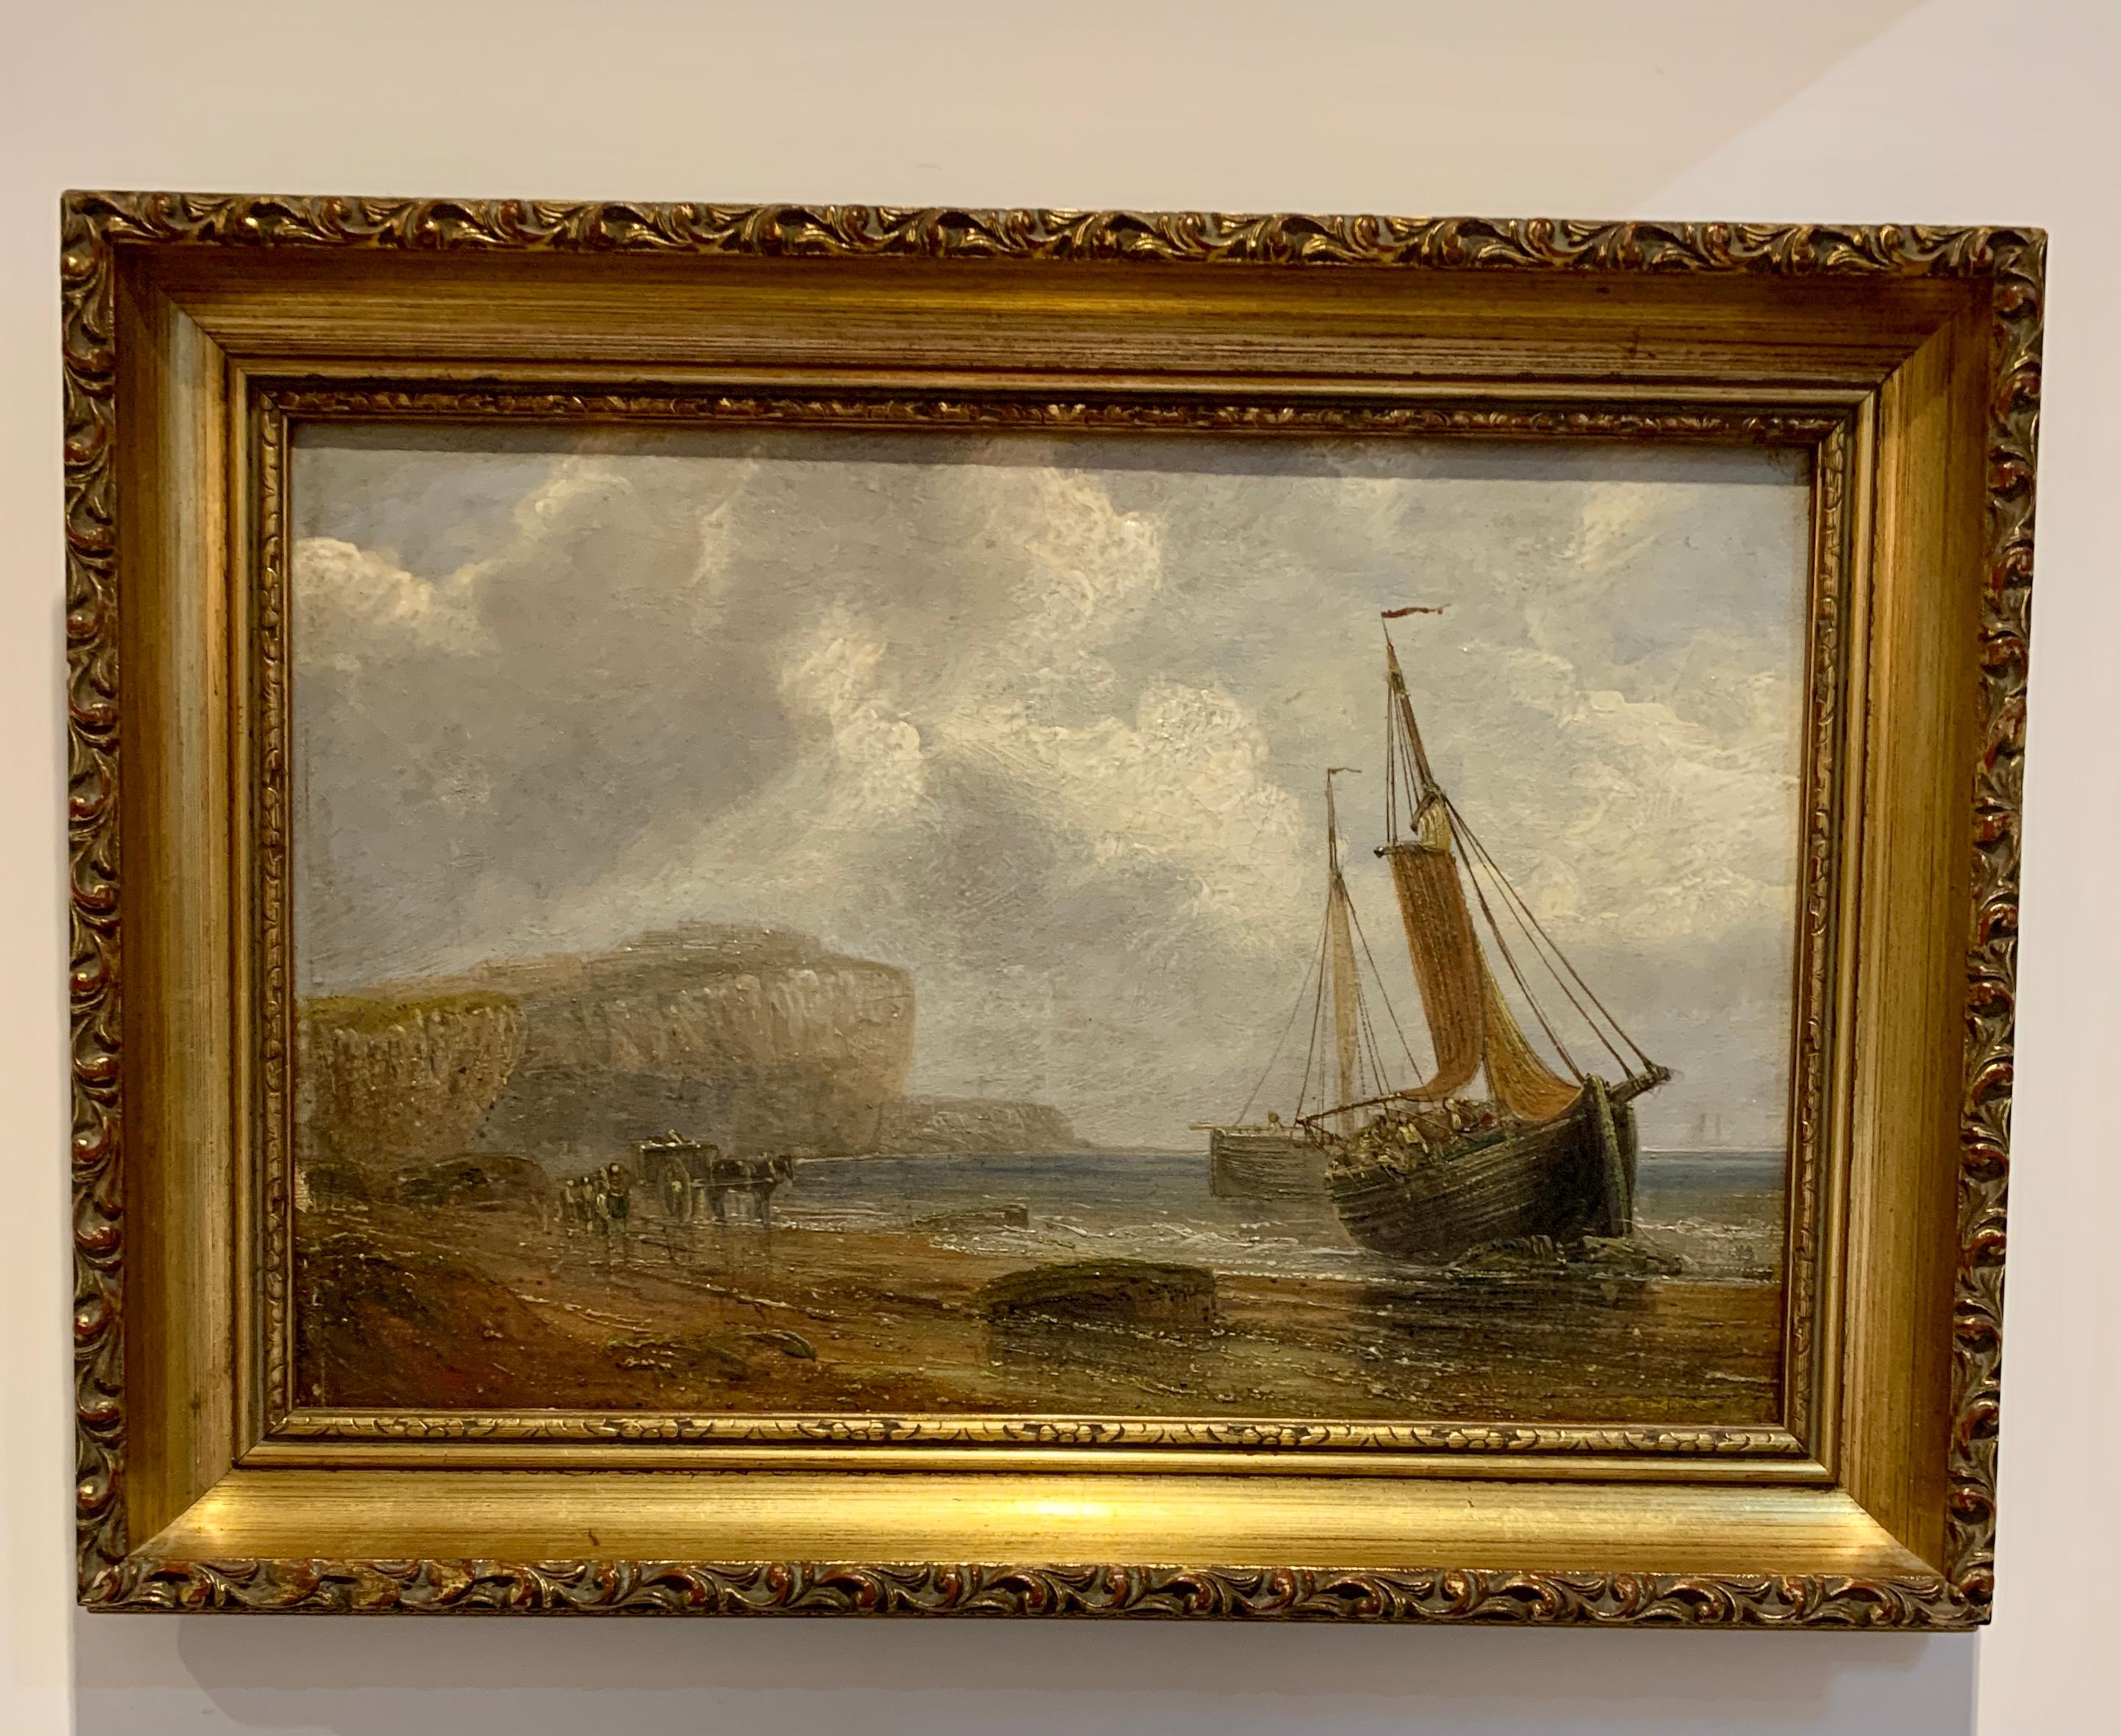 English 19th century Antique beach landscape with fishing boat on the shore - Painting by Unknown